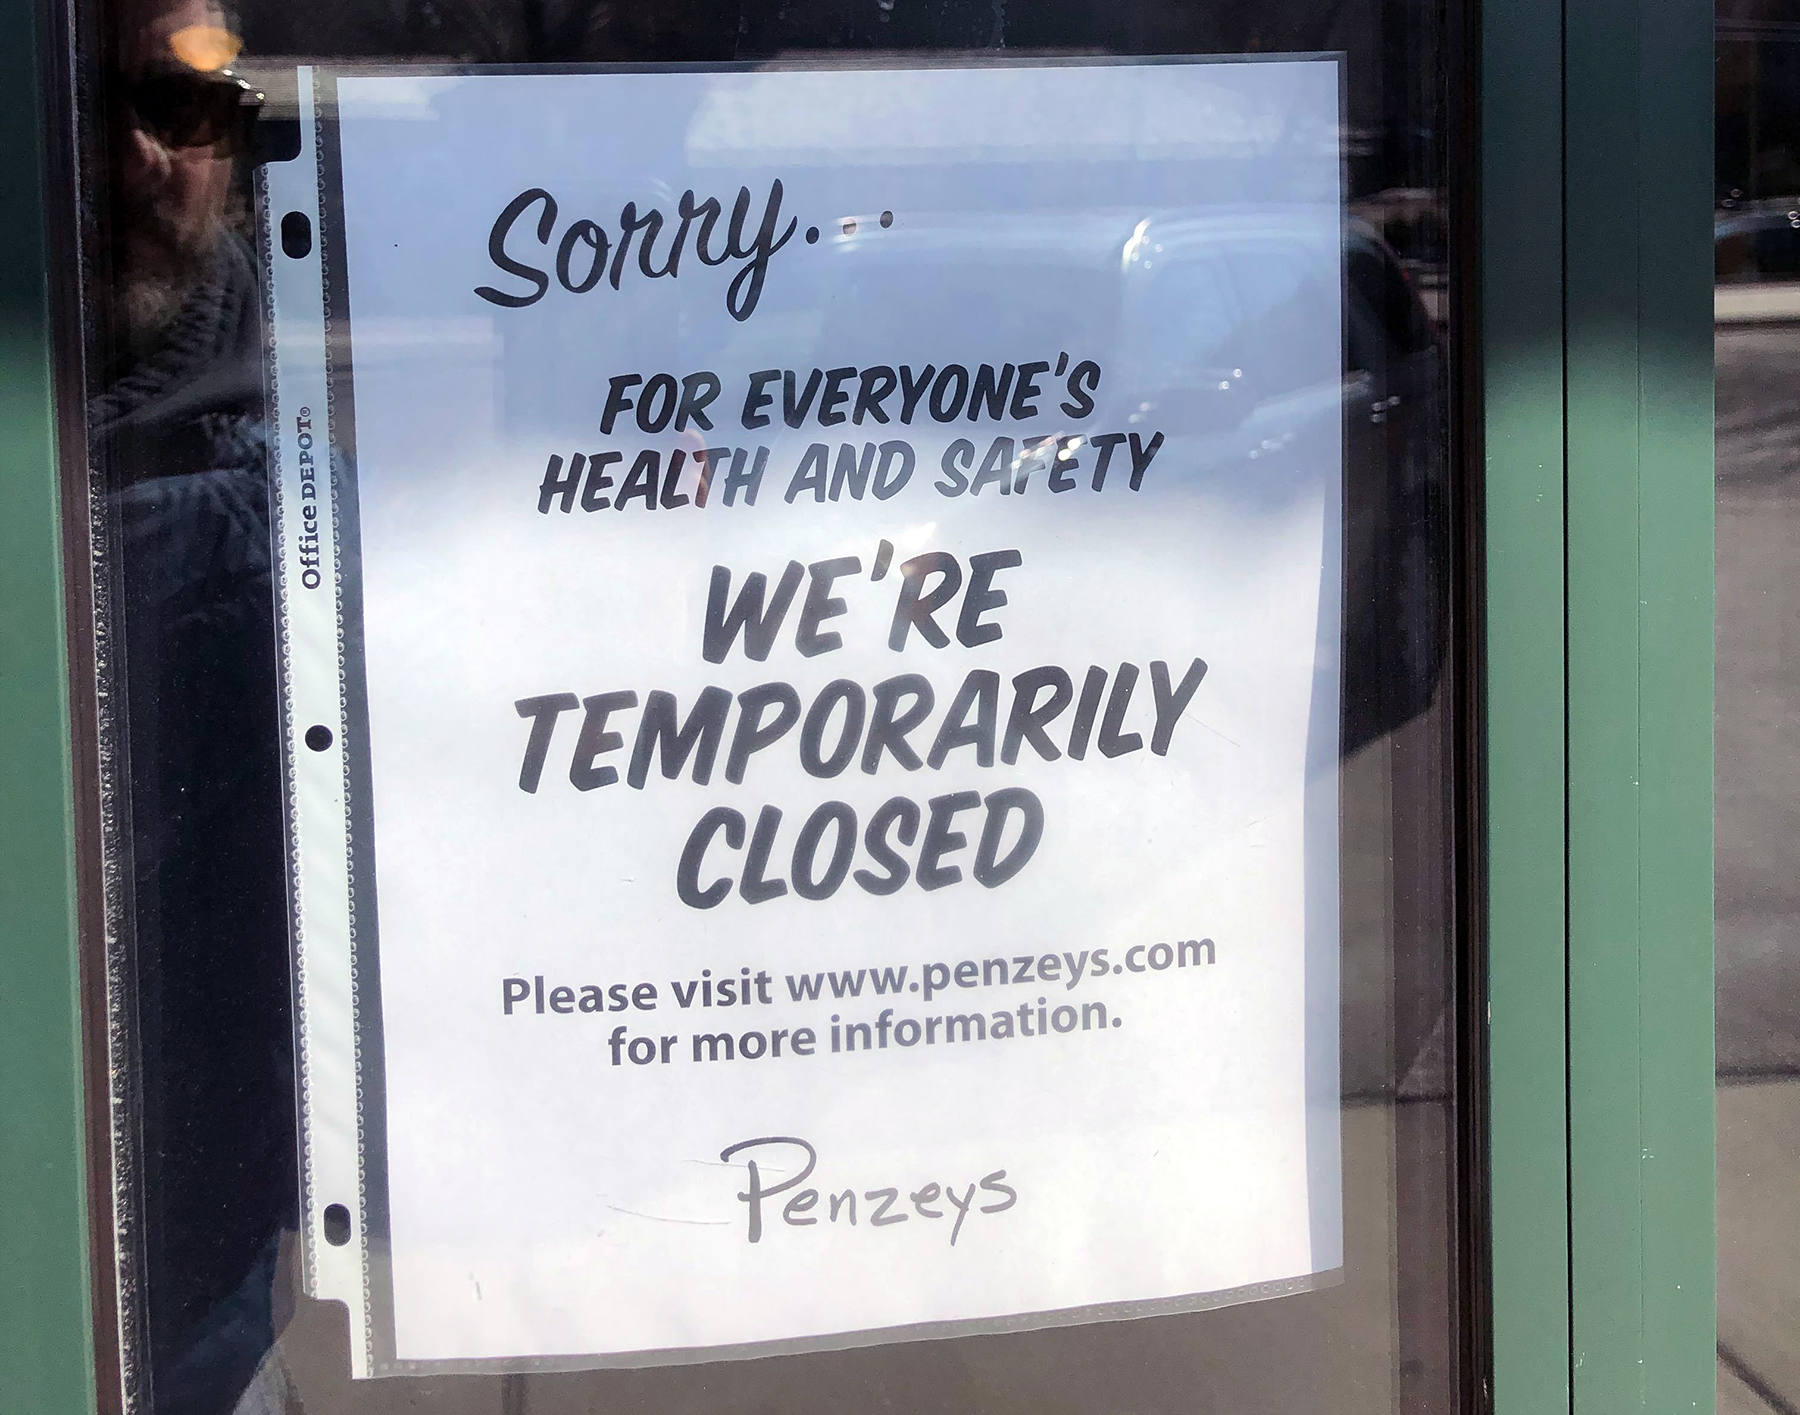 Penzeys Spices announced it would close due to COVID-19